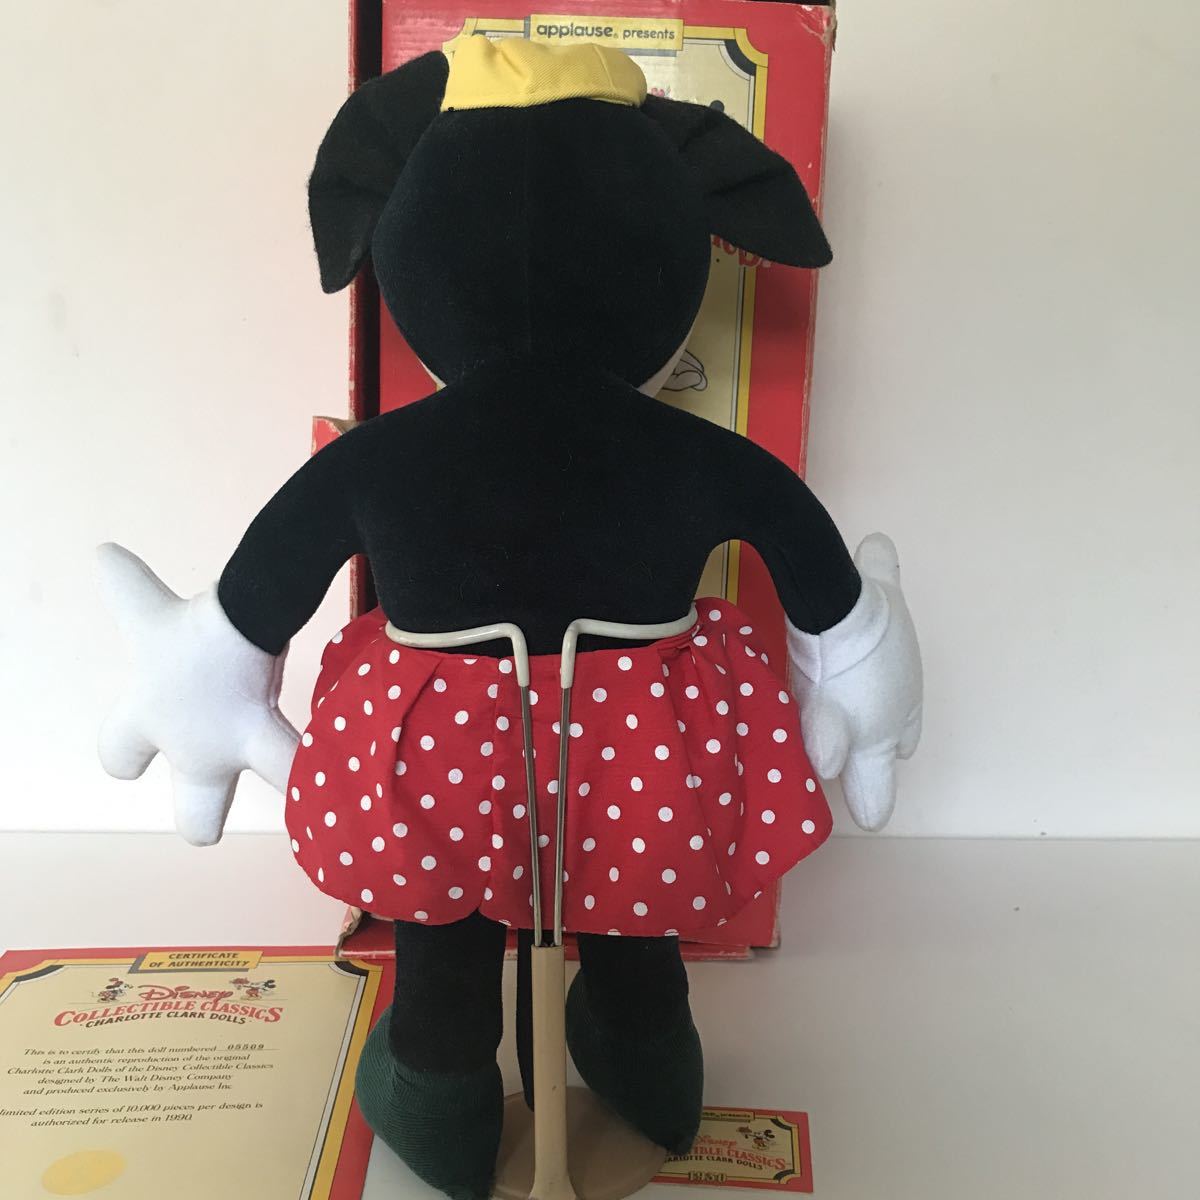  ultra rare America rose ball limitation one ten thousand body 1990 serial number 5509 soft toy Minnie Mouse Disney 90 period retro minnie USA Roth 